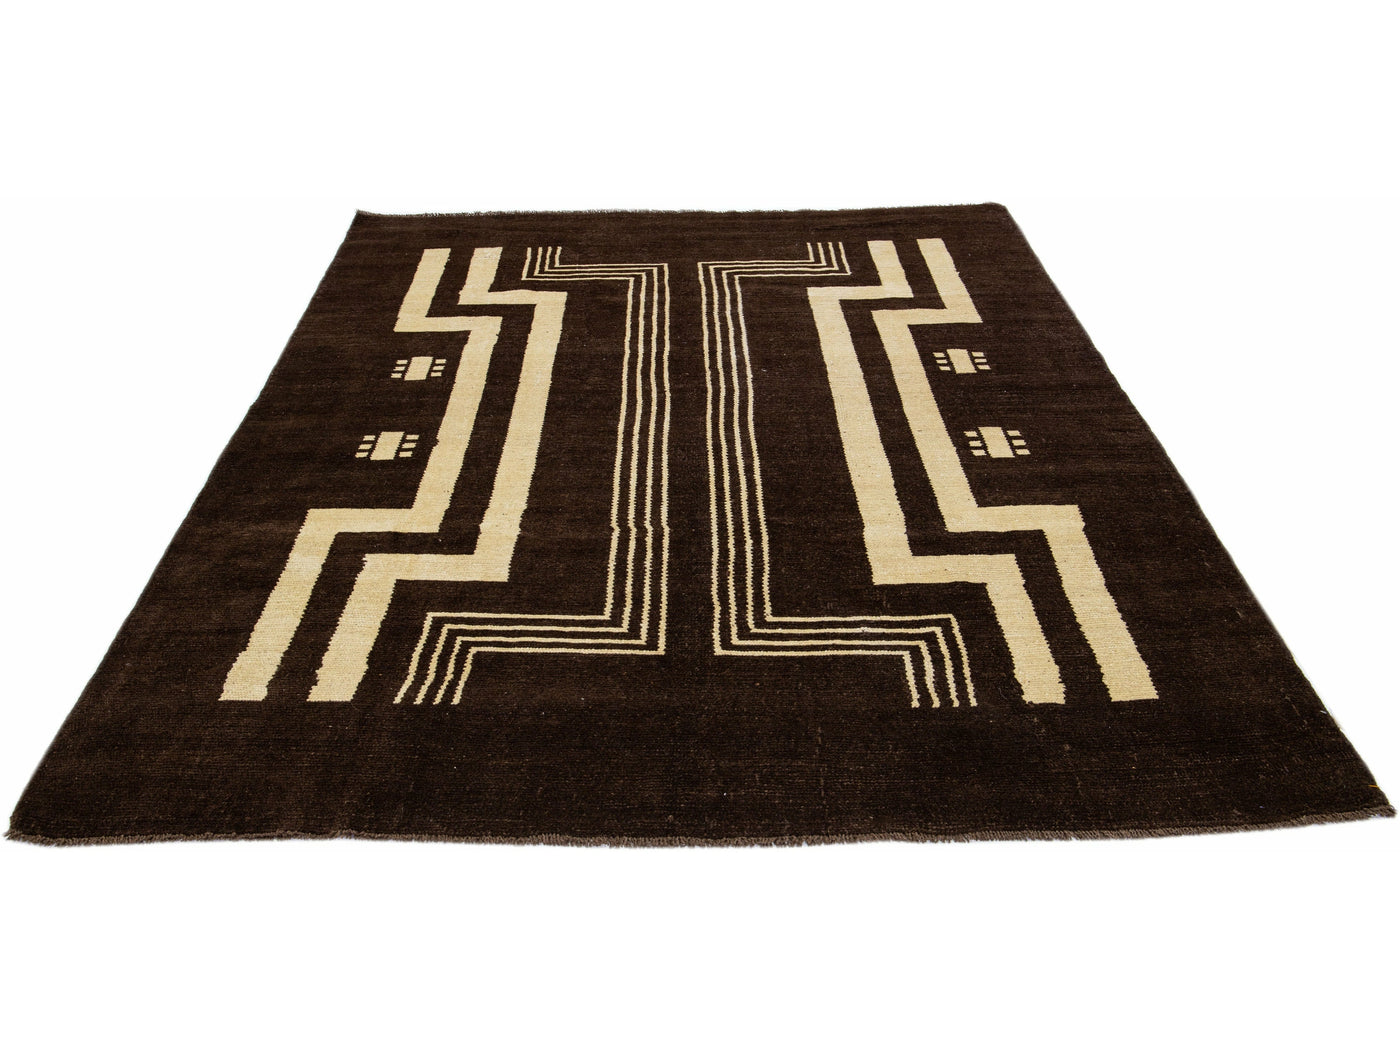 Transitional Revival Wool Rug 7 X 9